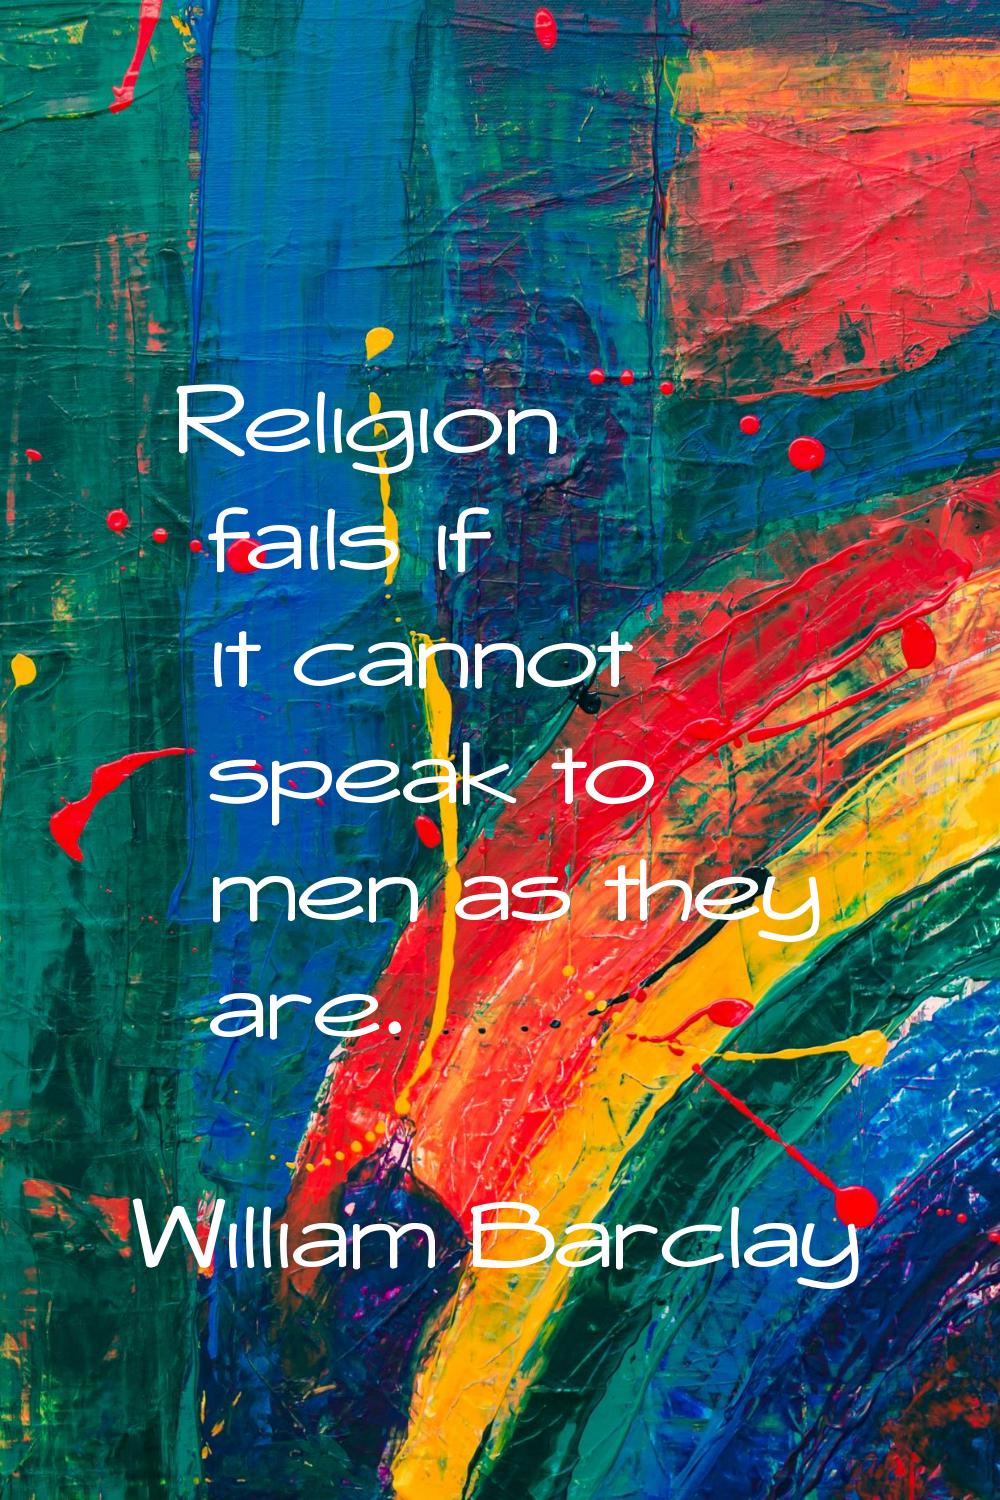 Religion fails if it cannot speak to men as they are.